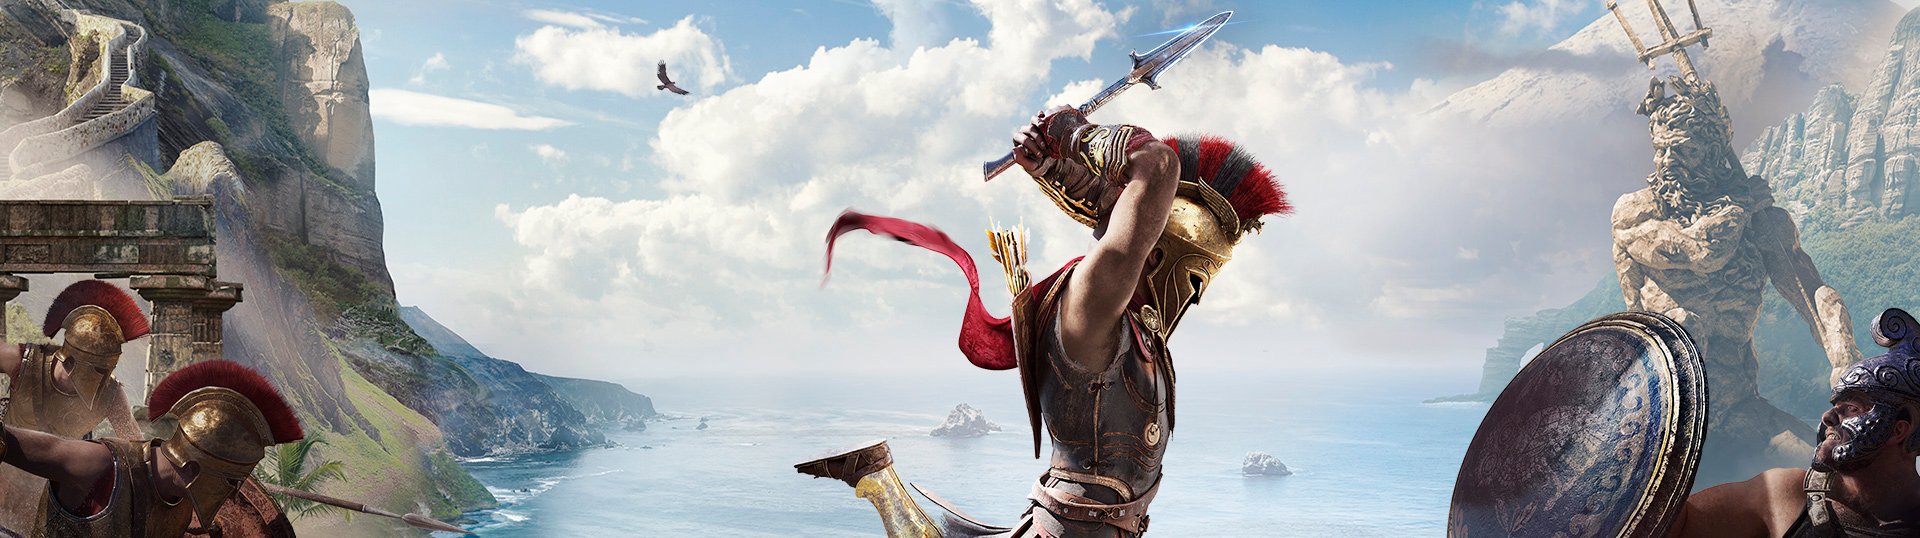 Buy Assassin's Creed® Odyssey Pantheon Collector's Edition for Xbox One |  Ubisoft Official Store